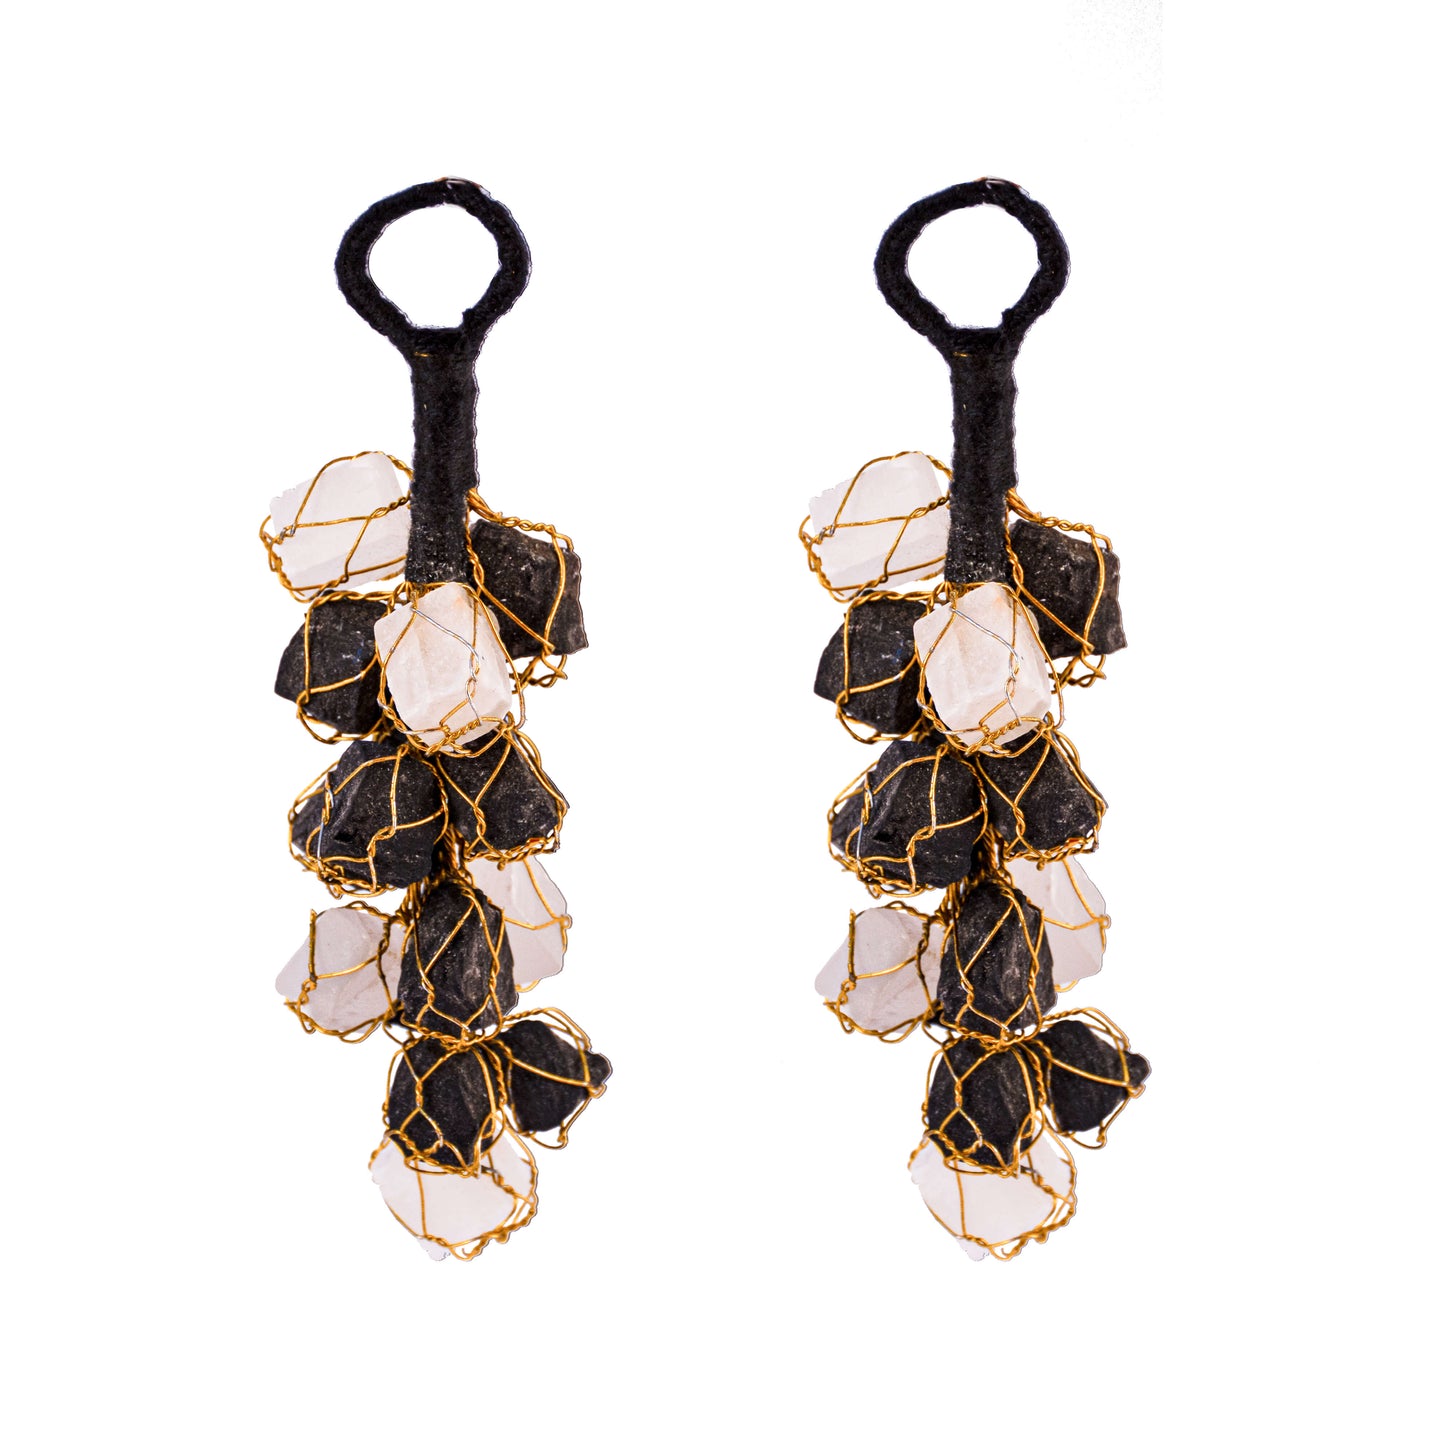 Black Tourmaline/Selenite Stone Crystal Door Hanging for Protection from Negative Energy (Pack of 2)